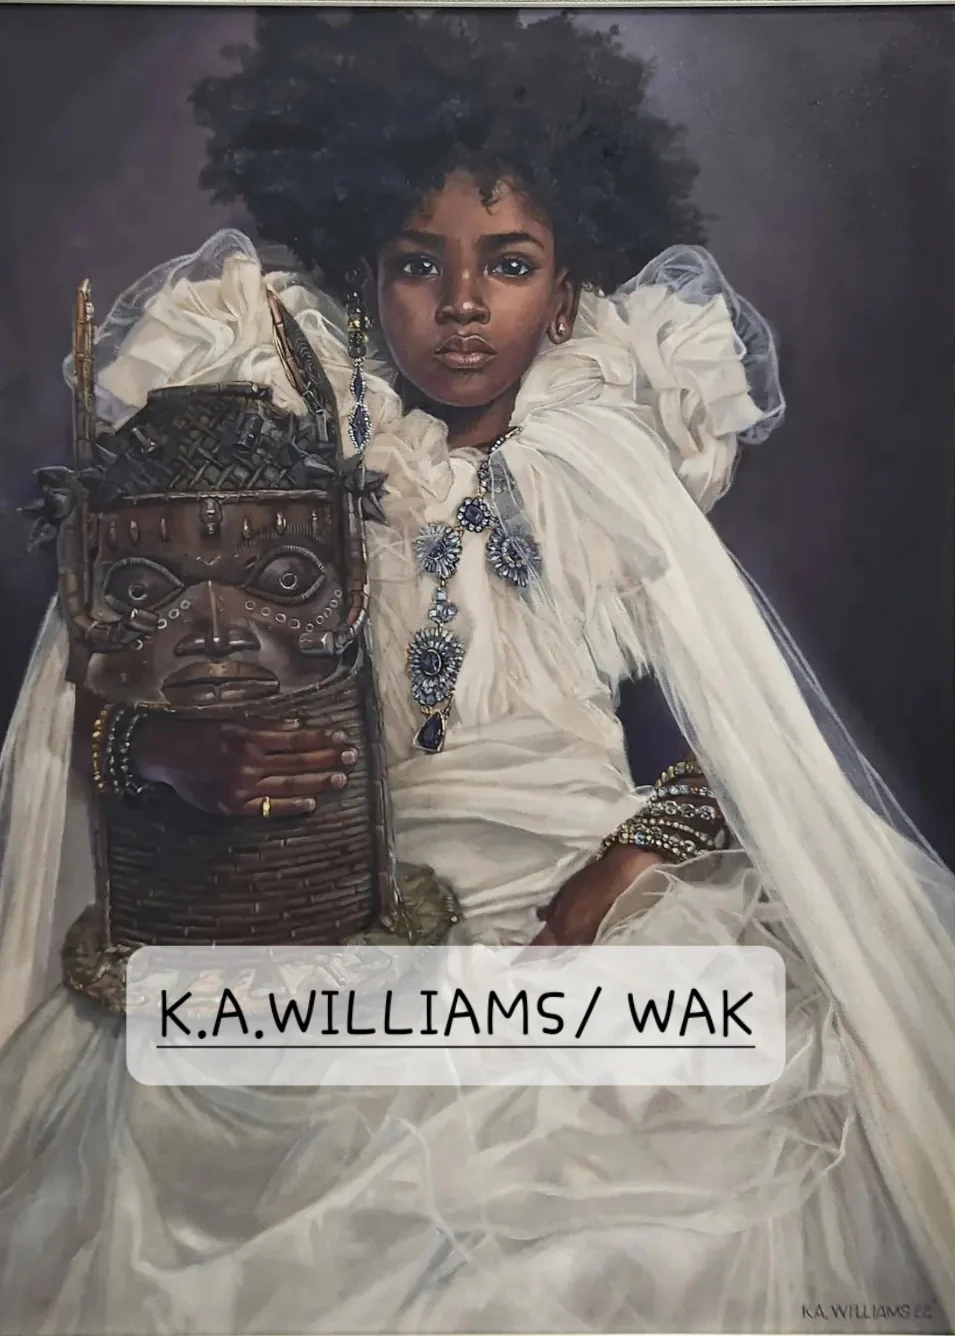 Kevin Williams (WAK) Reclaimed Hand-Embellished Giclee on Canvas